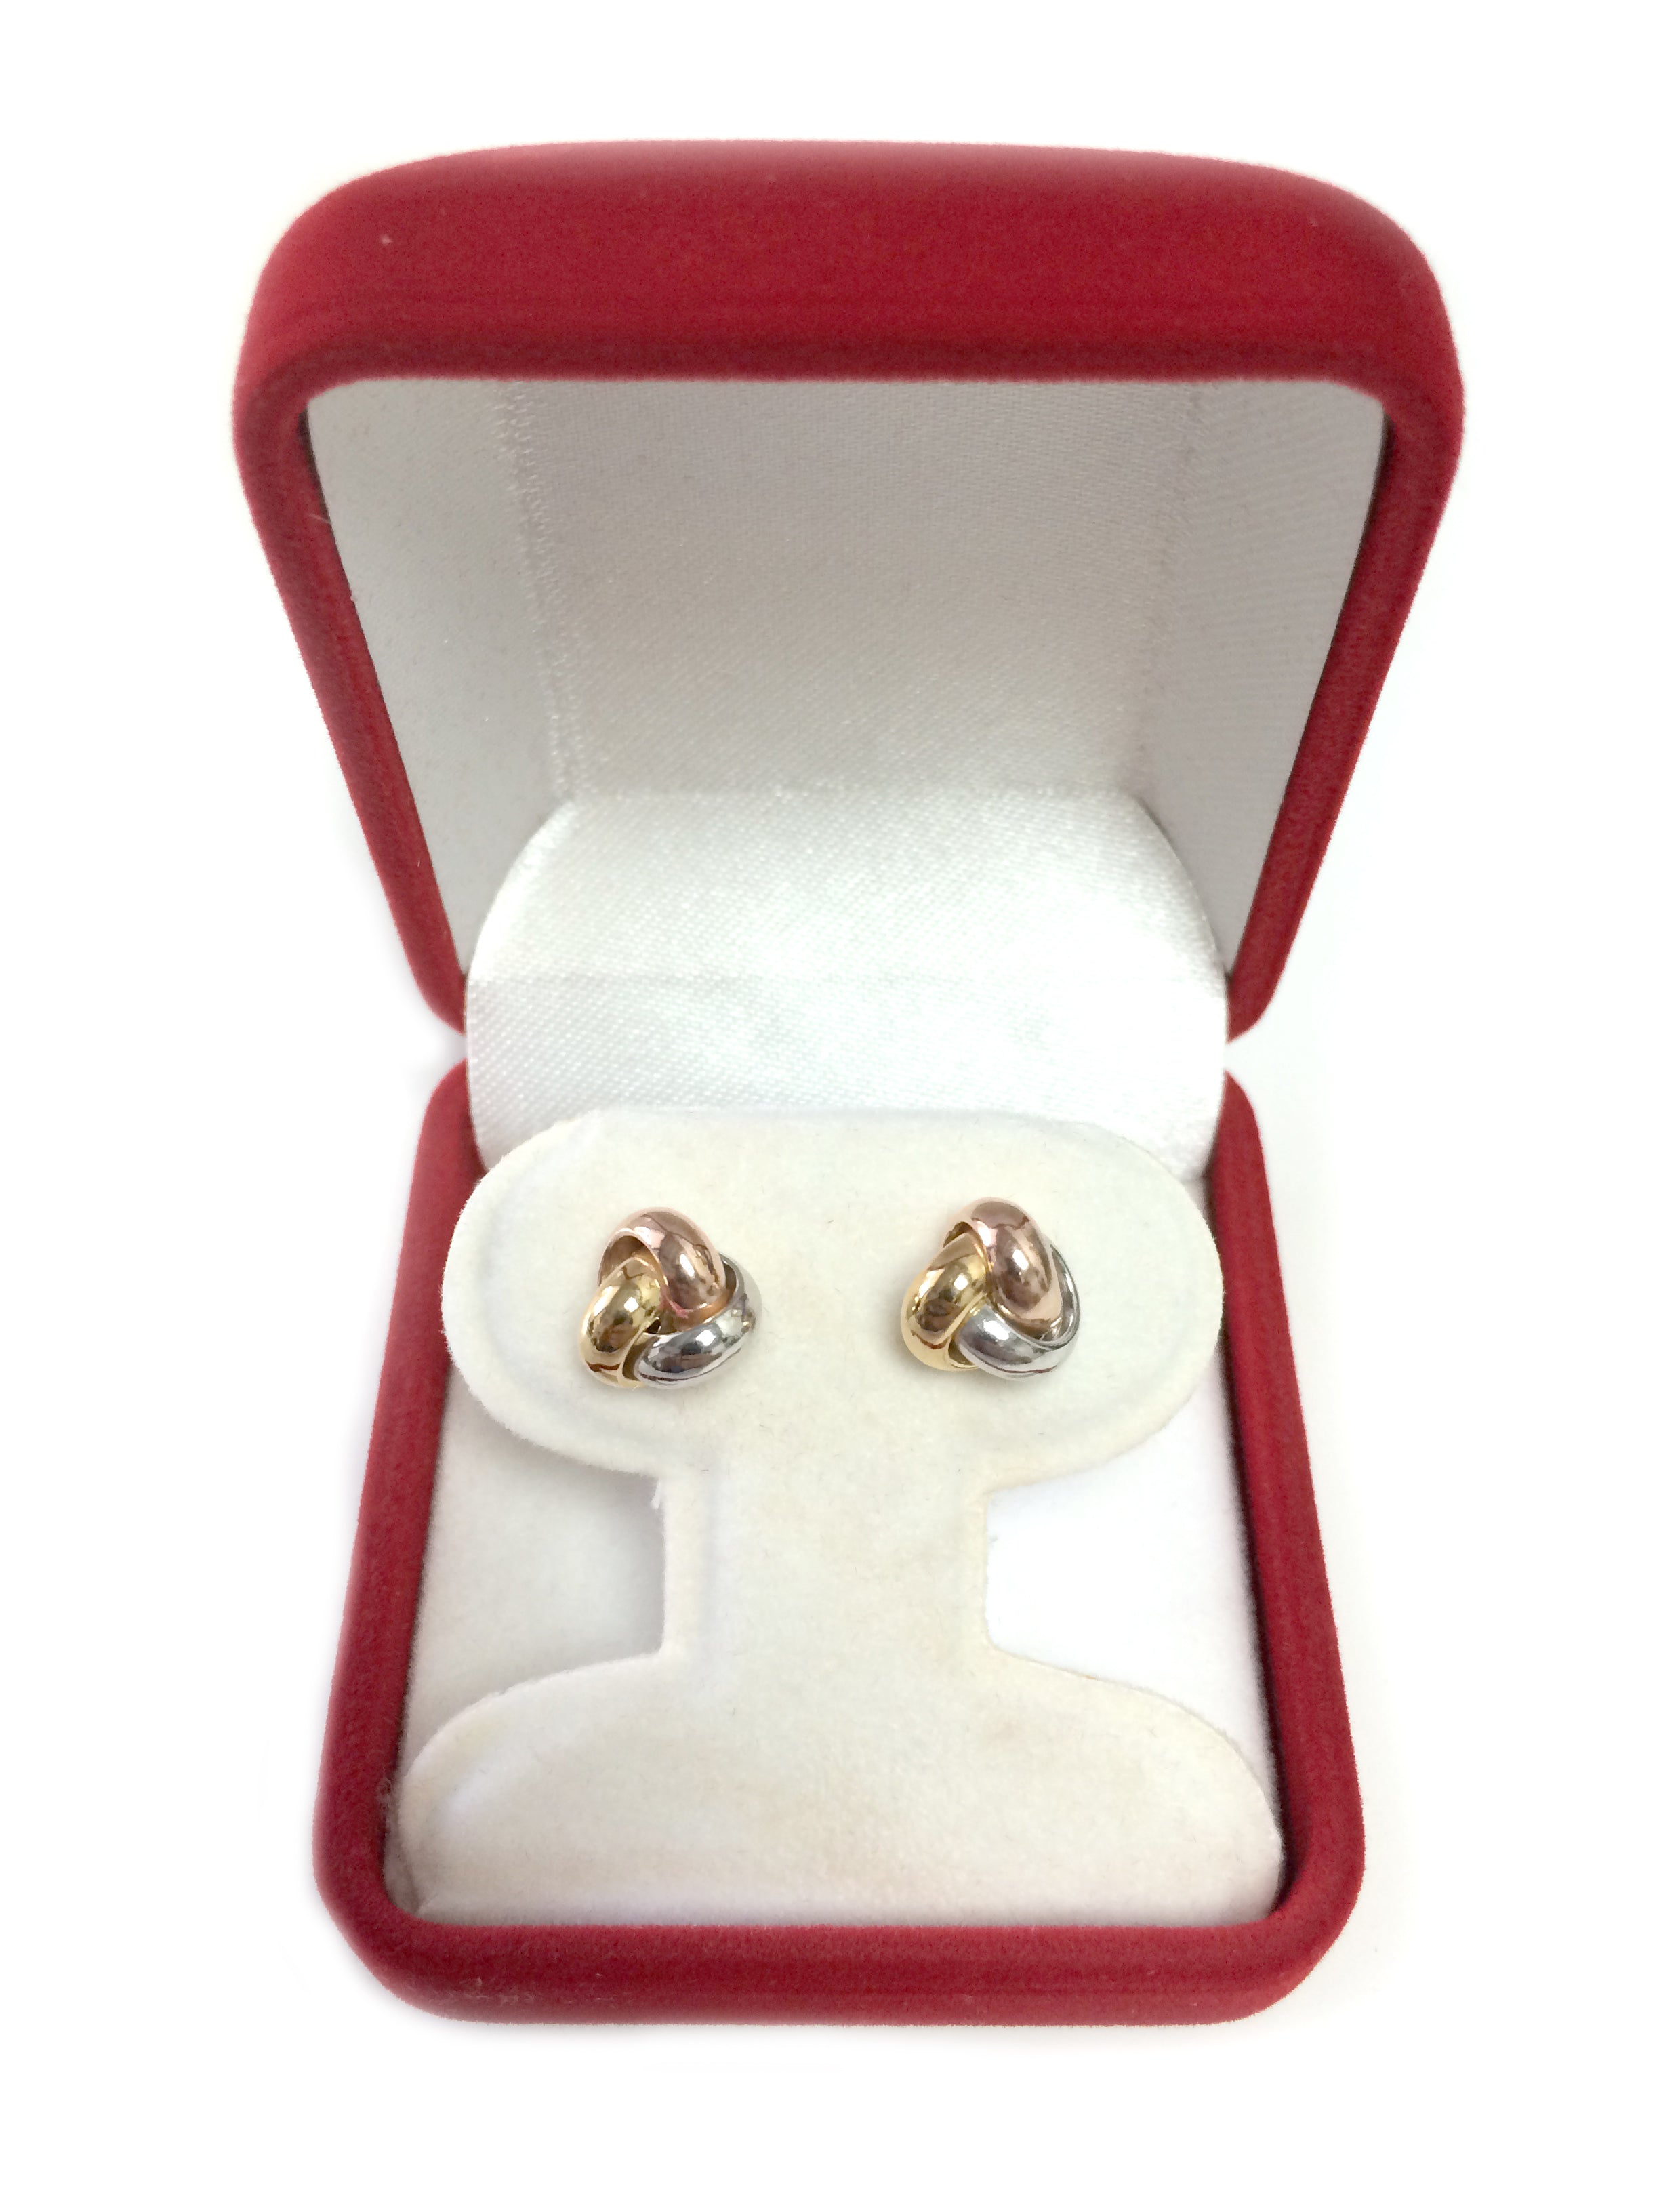 14k Tricolor Yellow White And Rose Gold Shiny Love Knot Stud Earrings, 9mm fine designer jewelry for men and women